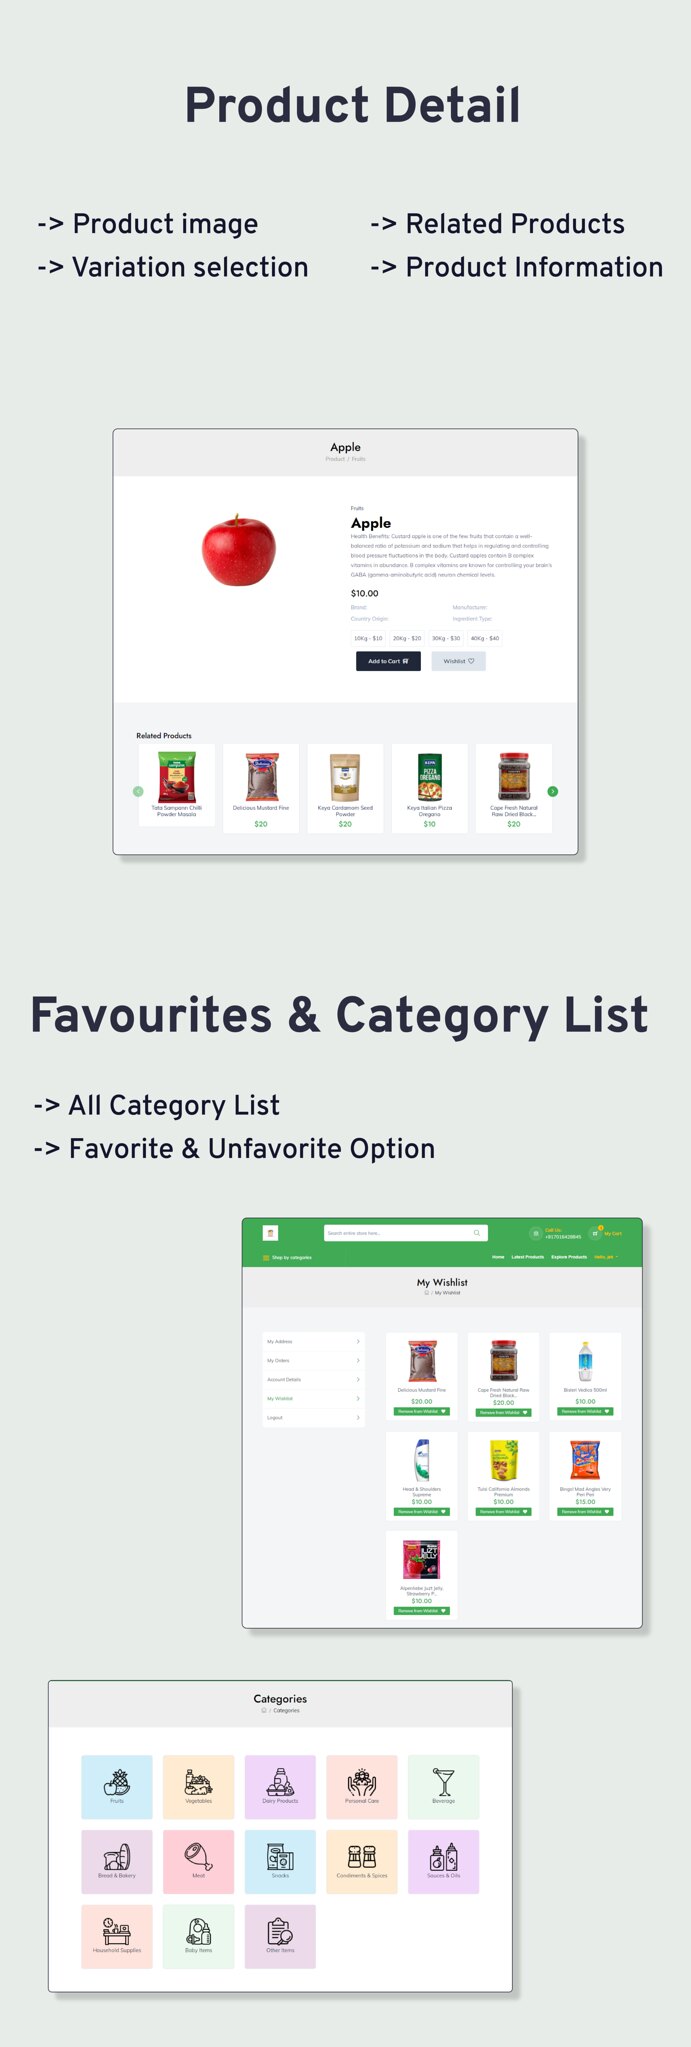 eGrocery - (Grocery, Pharmacy, eCommerce, Store) App and Web with Laravel Admin Panel + DeliveryApp - 11